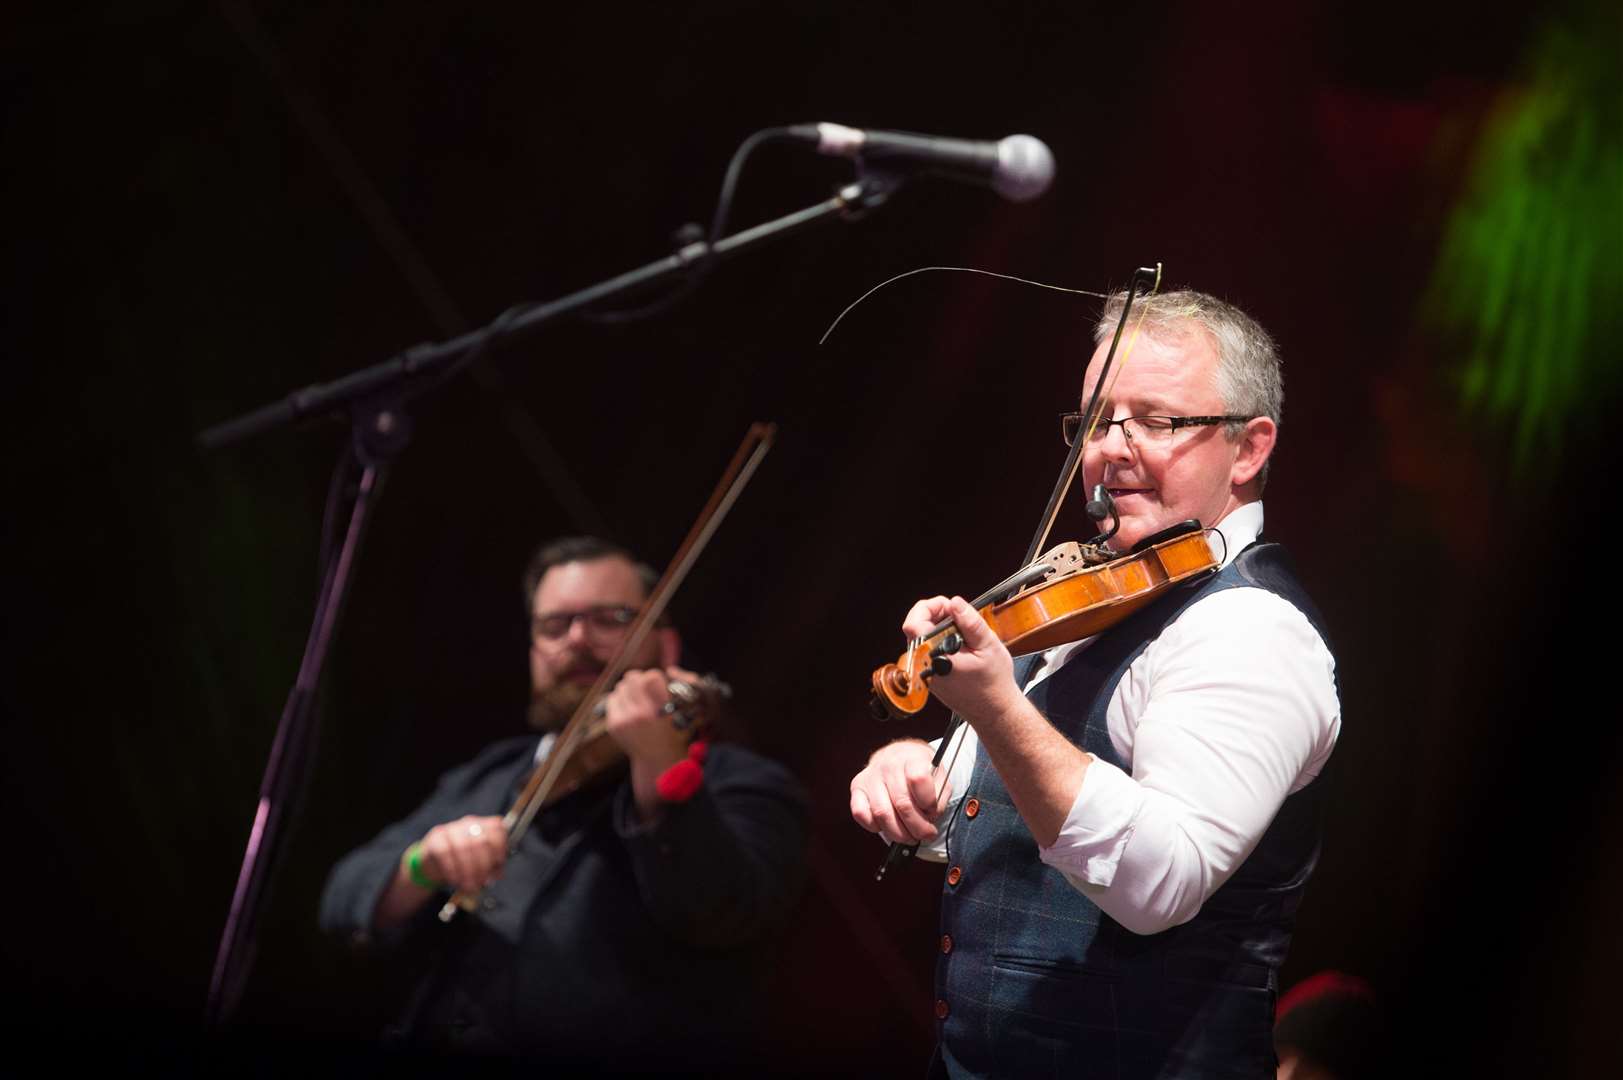 Blazin' Fiddles at the Red Hot Highland Fling at the Northern Meeting Park in Inverness.